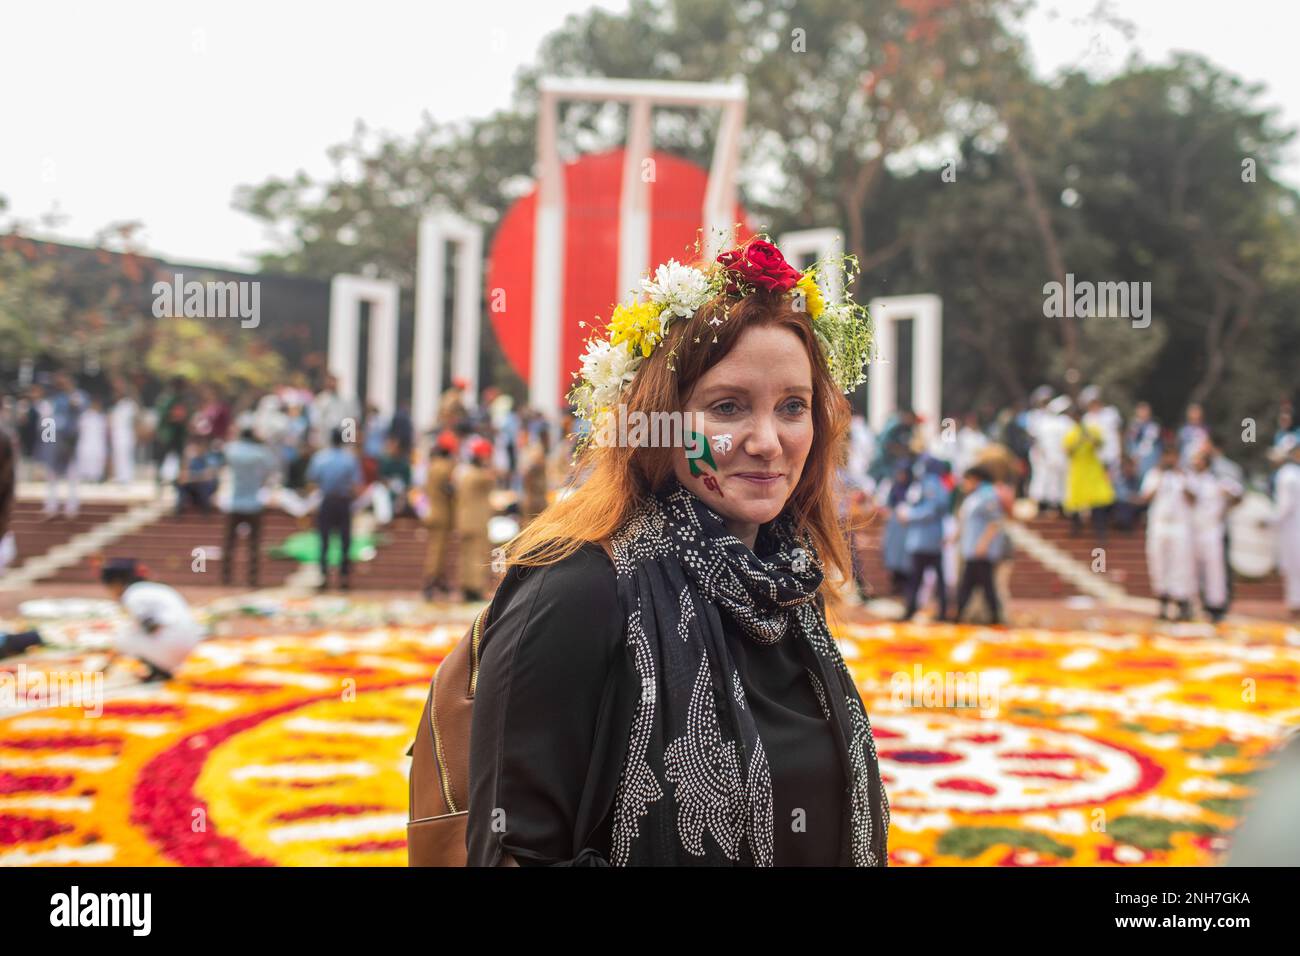 A foreigner poses for a photo with flowers on her head at the Martyr's Monument, or Shaheed Minar during the International Mother Language Day in Dhaka. Bangladeshis pay tribute at the Martyr's Monument, or Shaheed Minar, on International Mother Language Day in Dhaka, International Mother Language Day is observed in commemoration of the movement where a number of students died in 1952, defending the recognition of Bangla as a state language of the former East Pakistan, now Bangladesh. (Photo by Sazzad Hossain/SOPA Images/Sipa USA) Stock Photo